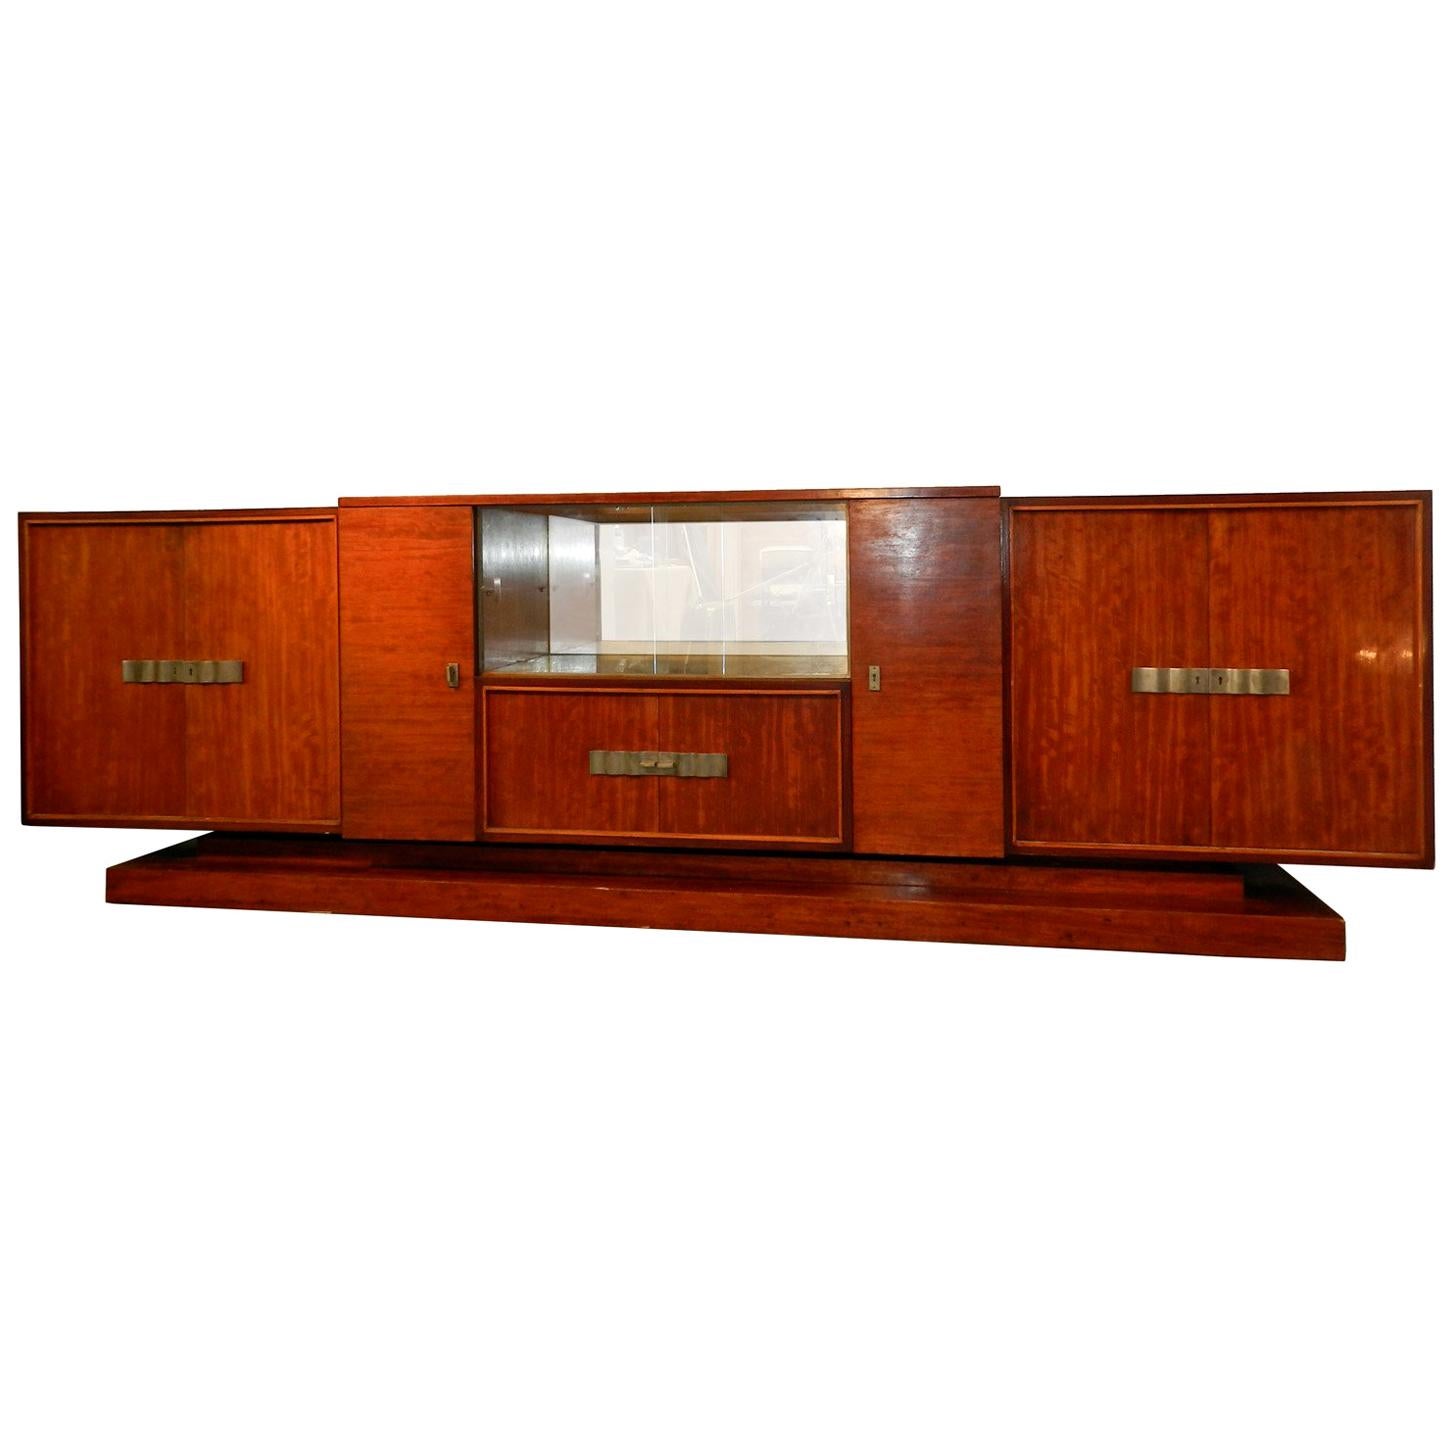 Decoene Freres, Large Art Deco Sideboard in MOVINGUI MOIRE , circa 1930 For Sale